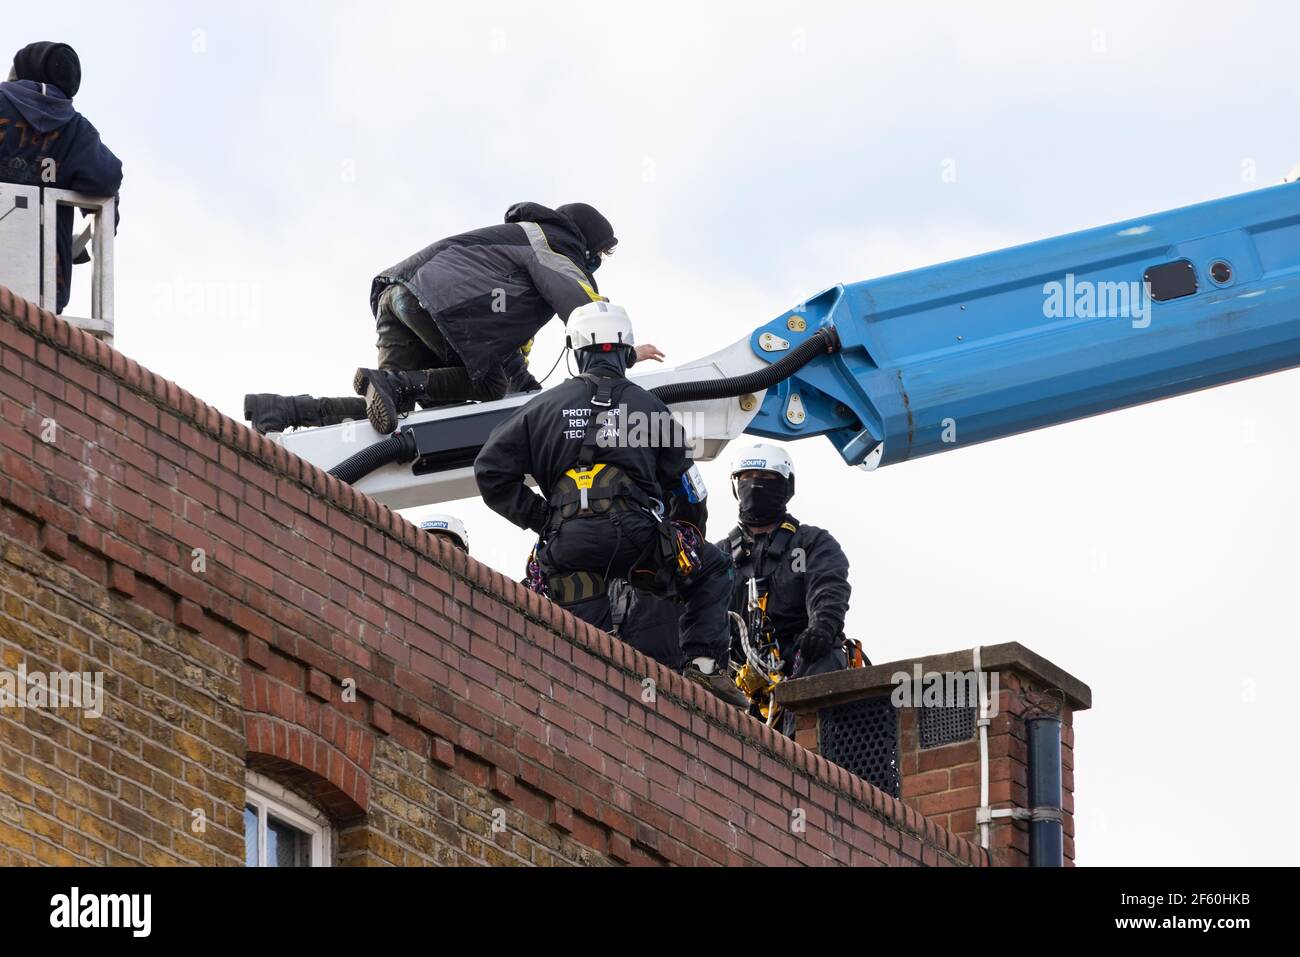 London, United Kingdom. 29th Mar, 2021. A protester sits on top of a crane used to access protesters on the rooftop. The police station had been occupied by squatters and autonomous activists under the name of ‘Not A Cop Shop’ for over a week, in opposition to the new ‘Police, Crime, Sentencing, and Courts Bill’ and femicide. Cavendish Road Police Station, Clapham, London, United Kingdom. Credit: Joshua Windsor/Alamy Live News. Stock Photo